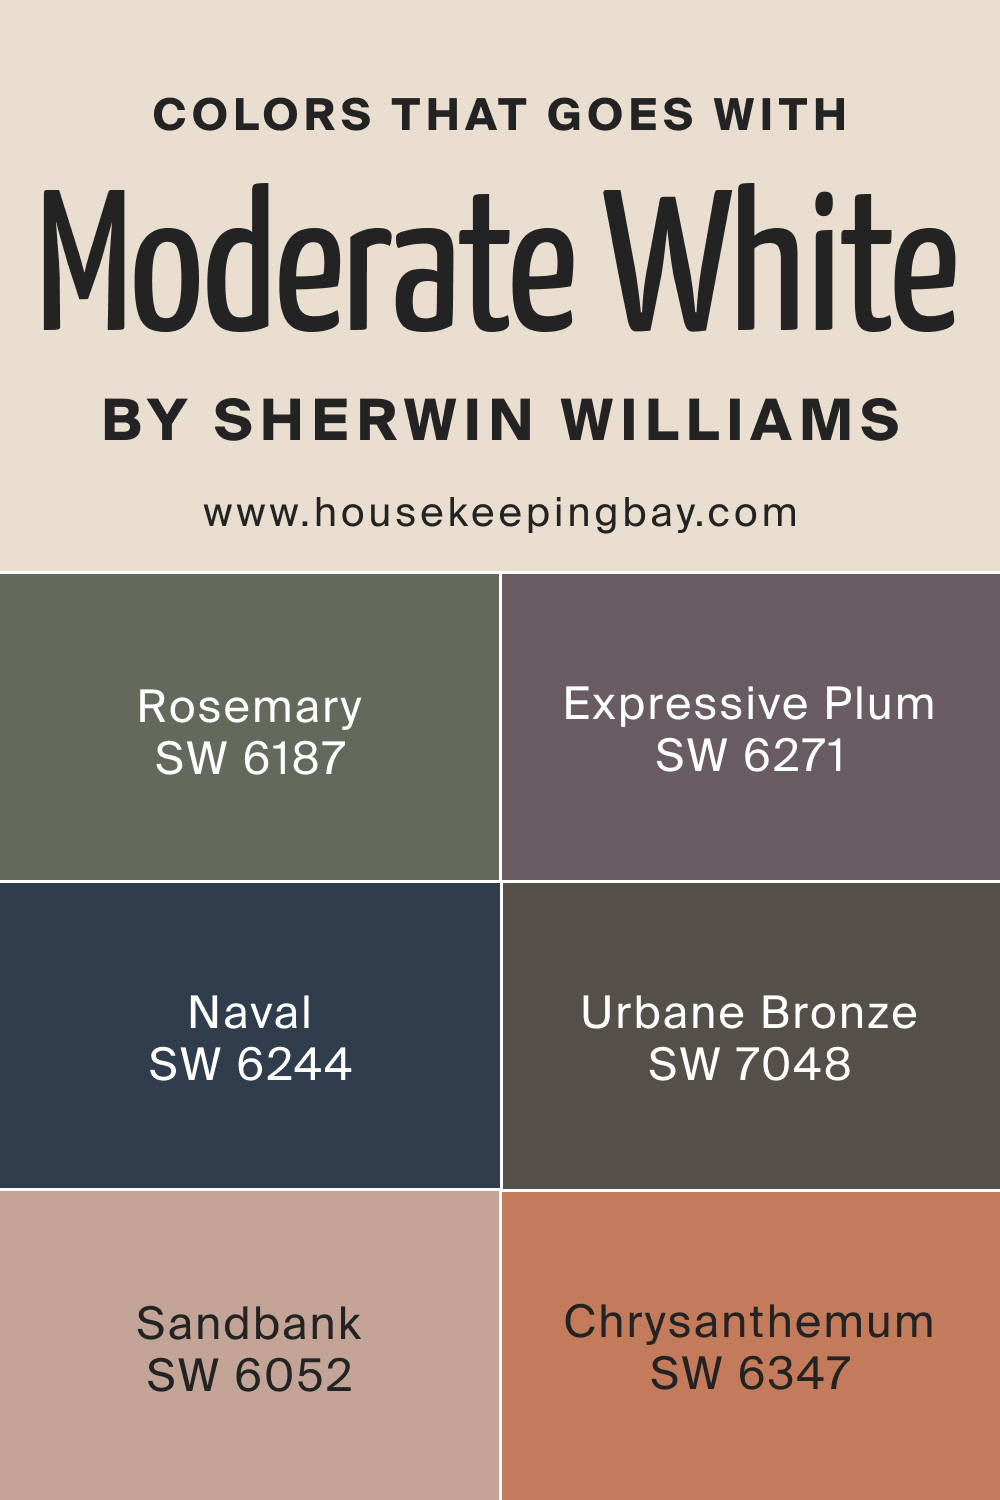 Colors that goes with SW Moderate White by Sherwin Williams